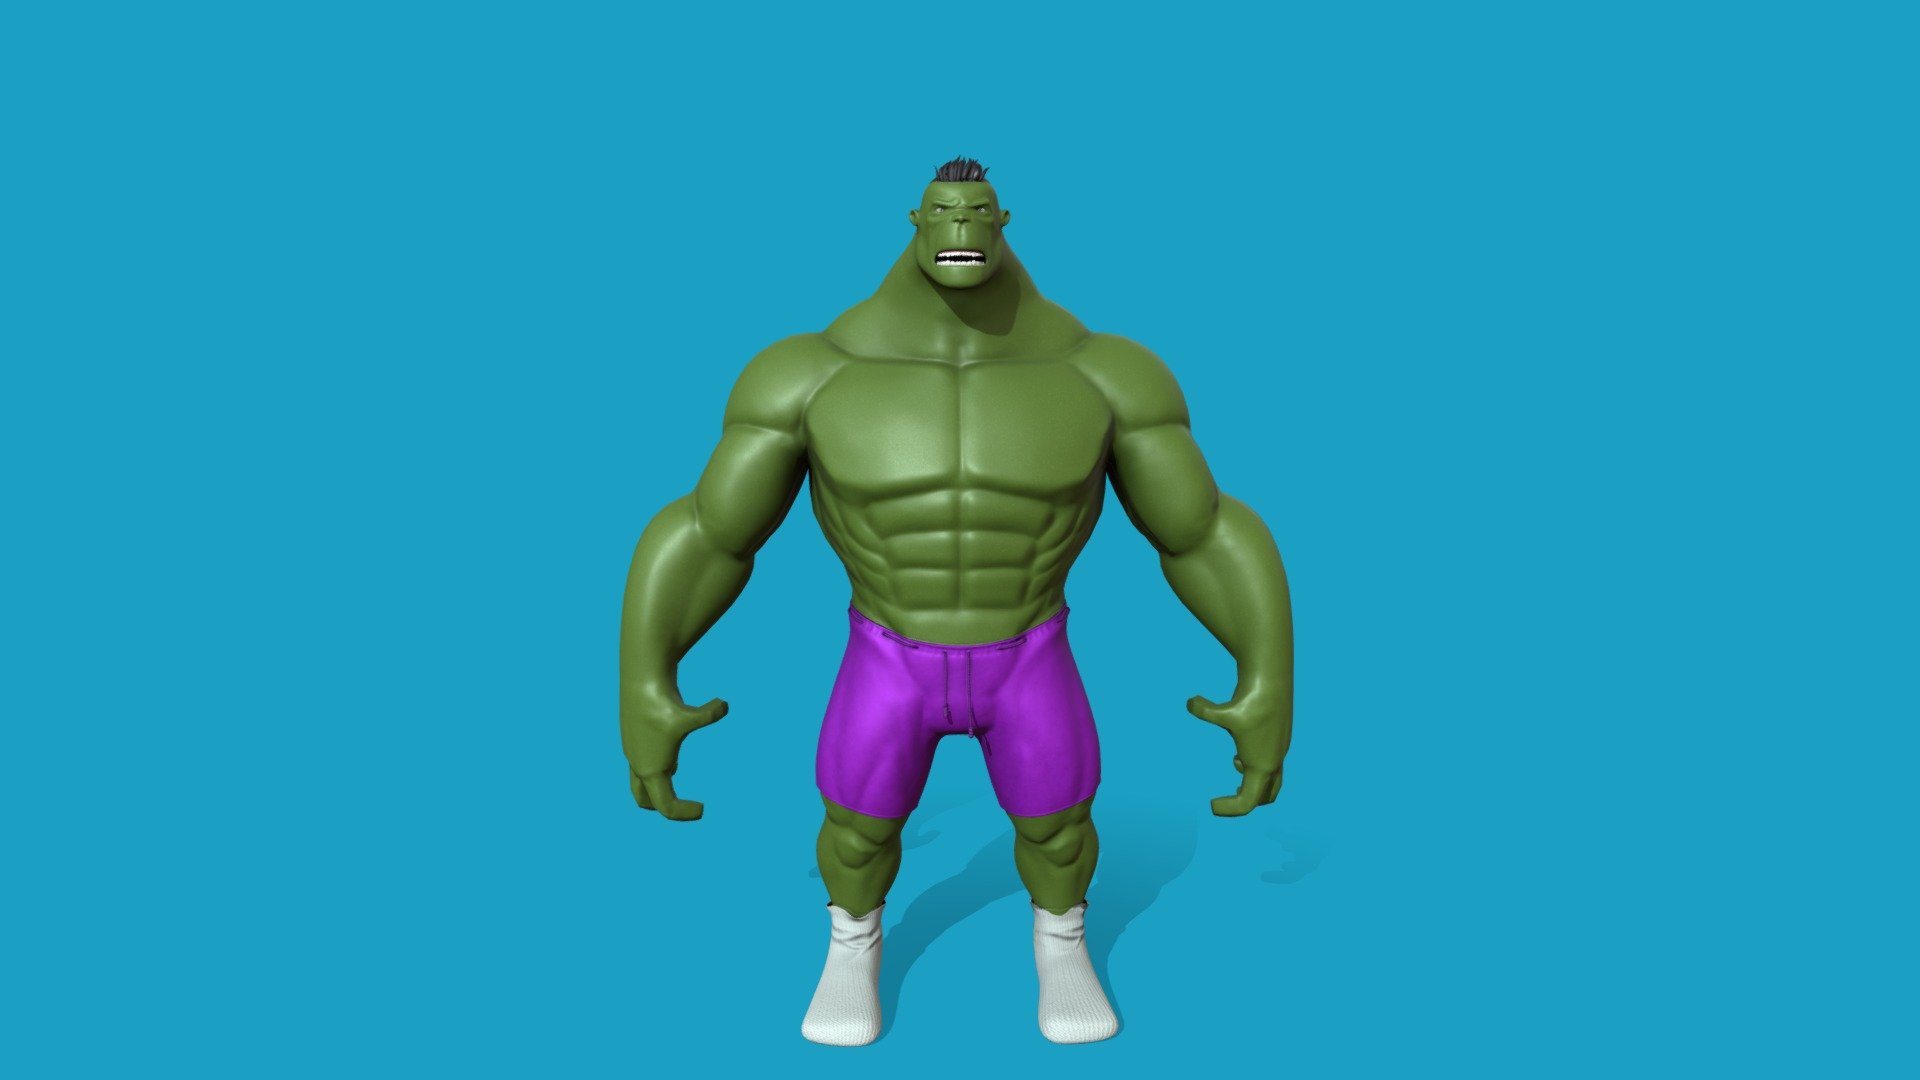 New model - HULK - 

Hulk - topologi made in 3ds max 
Hulk - Detail made in zBrush 
Hulk - Textured and rendered on Substance painter - Hulk - Low Poly Model - Buy Royalty Free 3D model by Fronter - Sama (@Fronter) 3d model